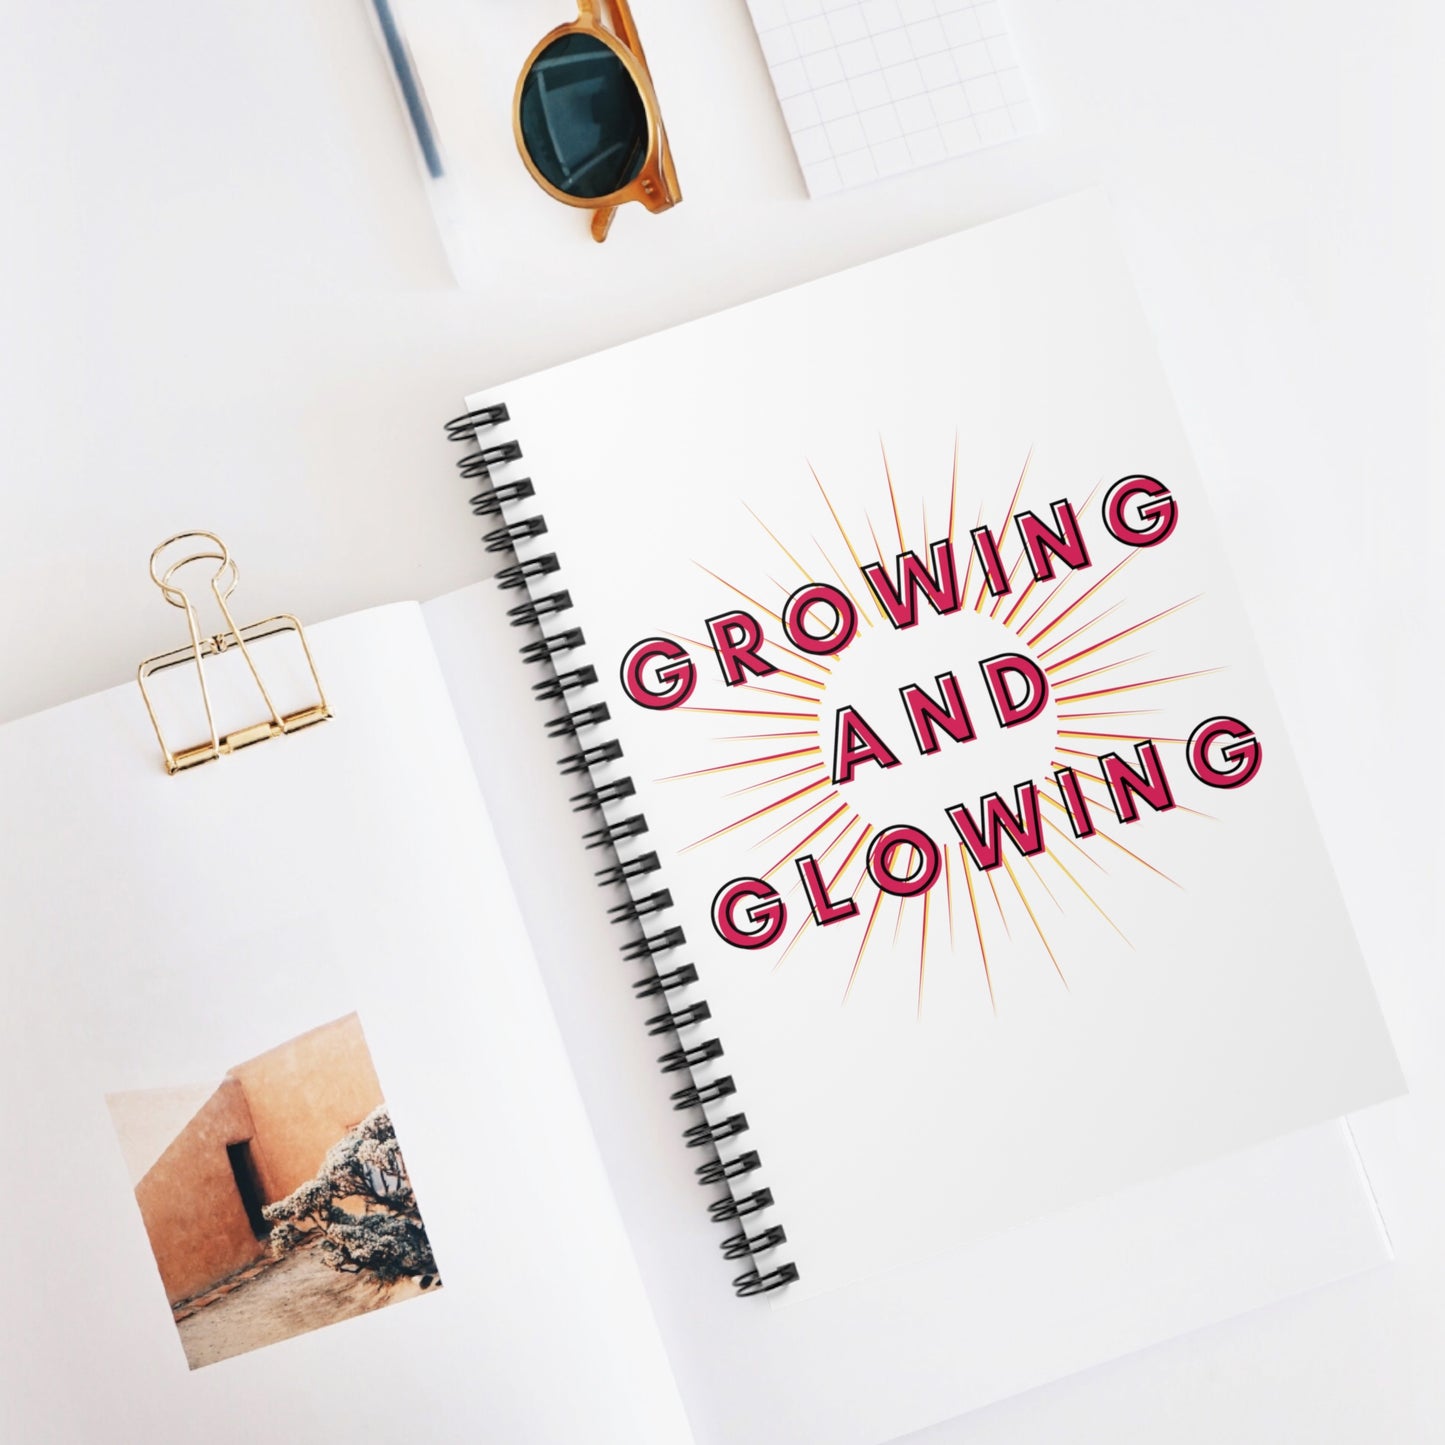 Growing & Glowing (Red Design) Spiral Notebook - Ruled Line